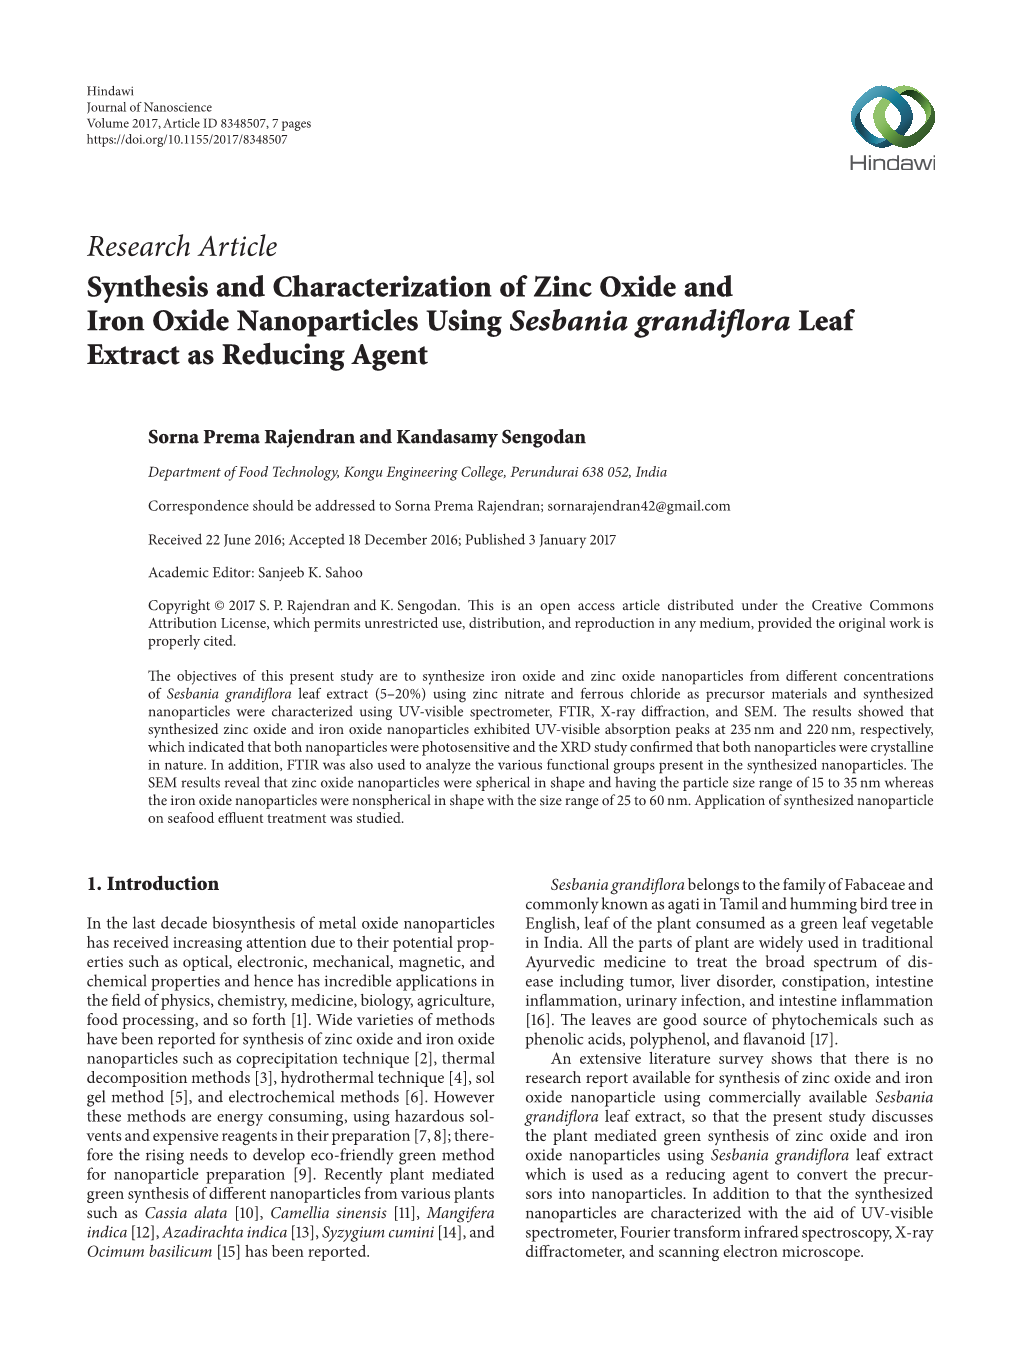 Research Article Synthesis and Characterization of Zinc Oxide and Iron Oxide Nanoparticles Using Sesbania Grandiflora Leaf Extract As Reducing Agent